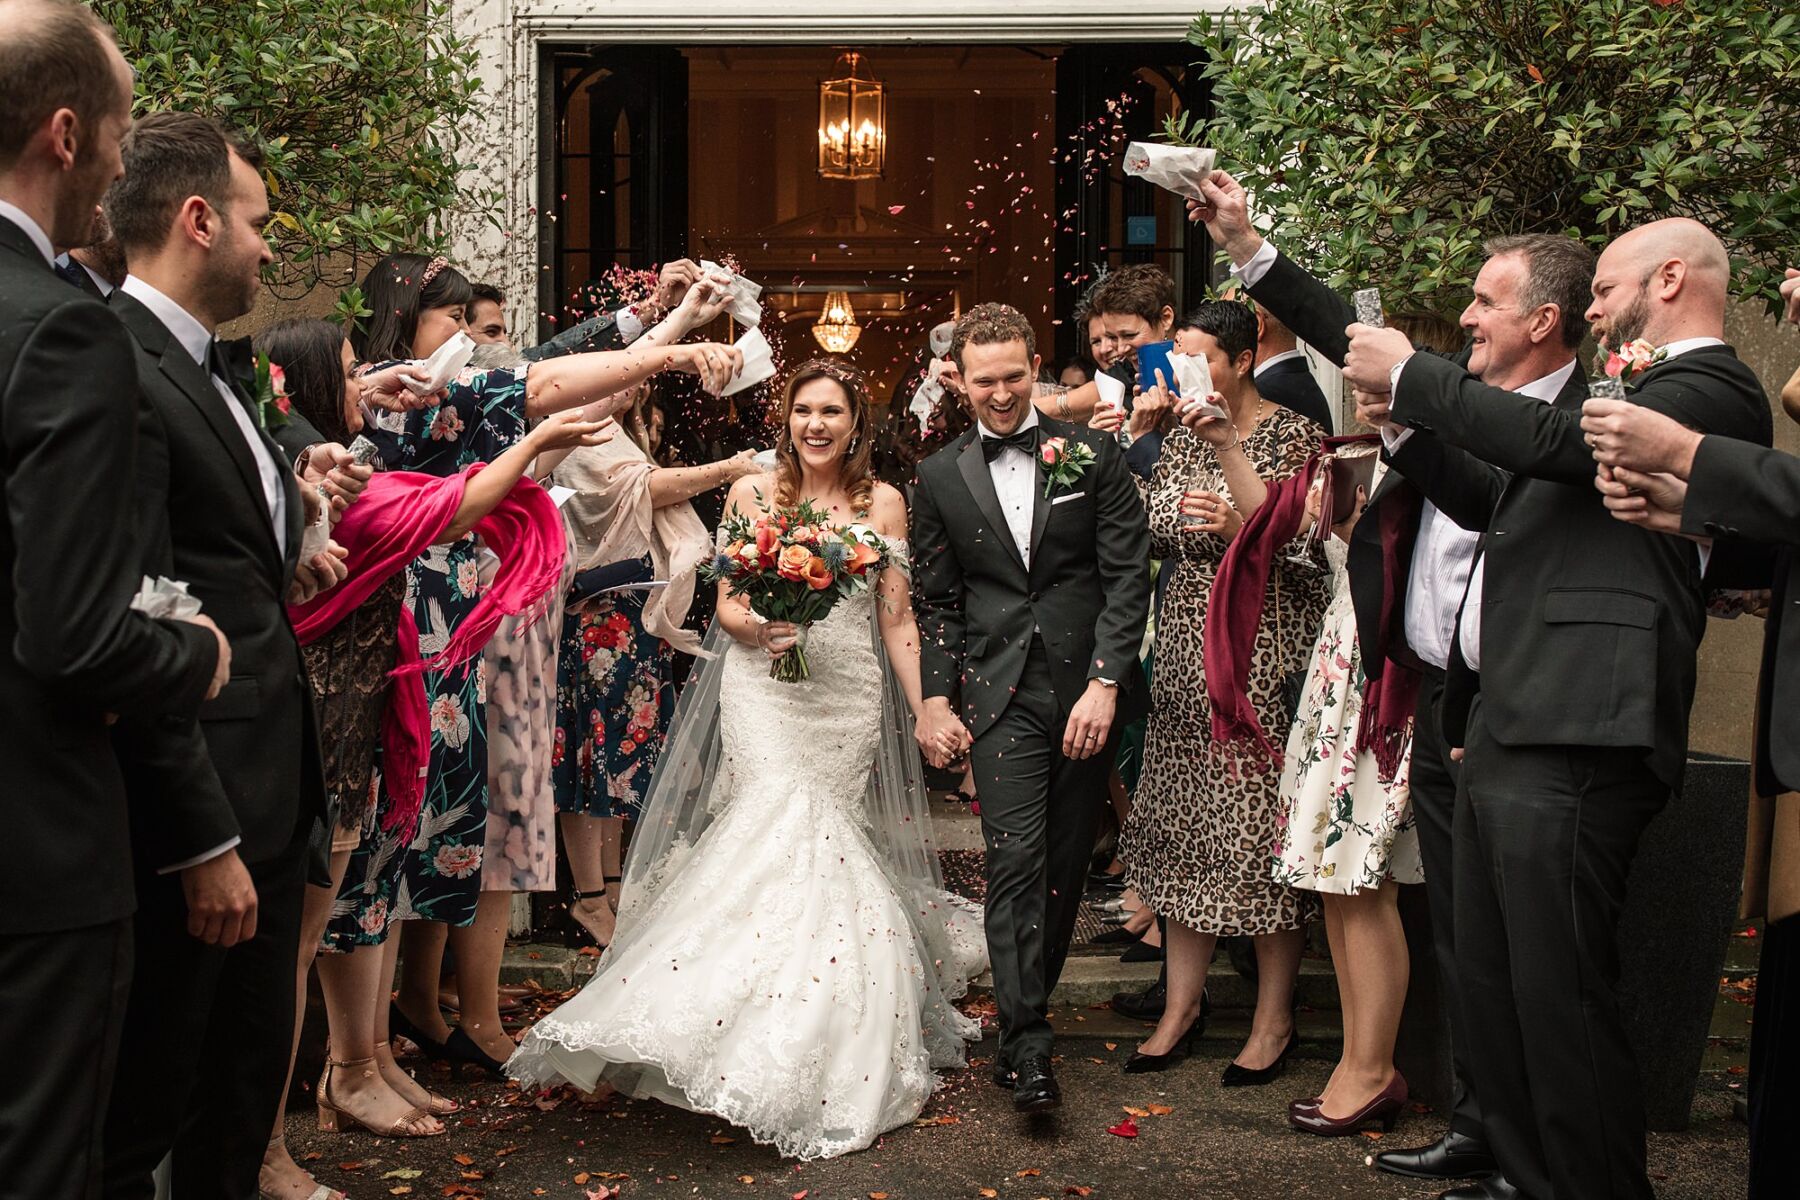 bride and groom at Offley Place walking together amongst guests who are throwing confetti. photo taken by Becky Harley Photography